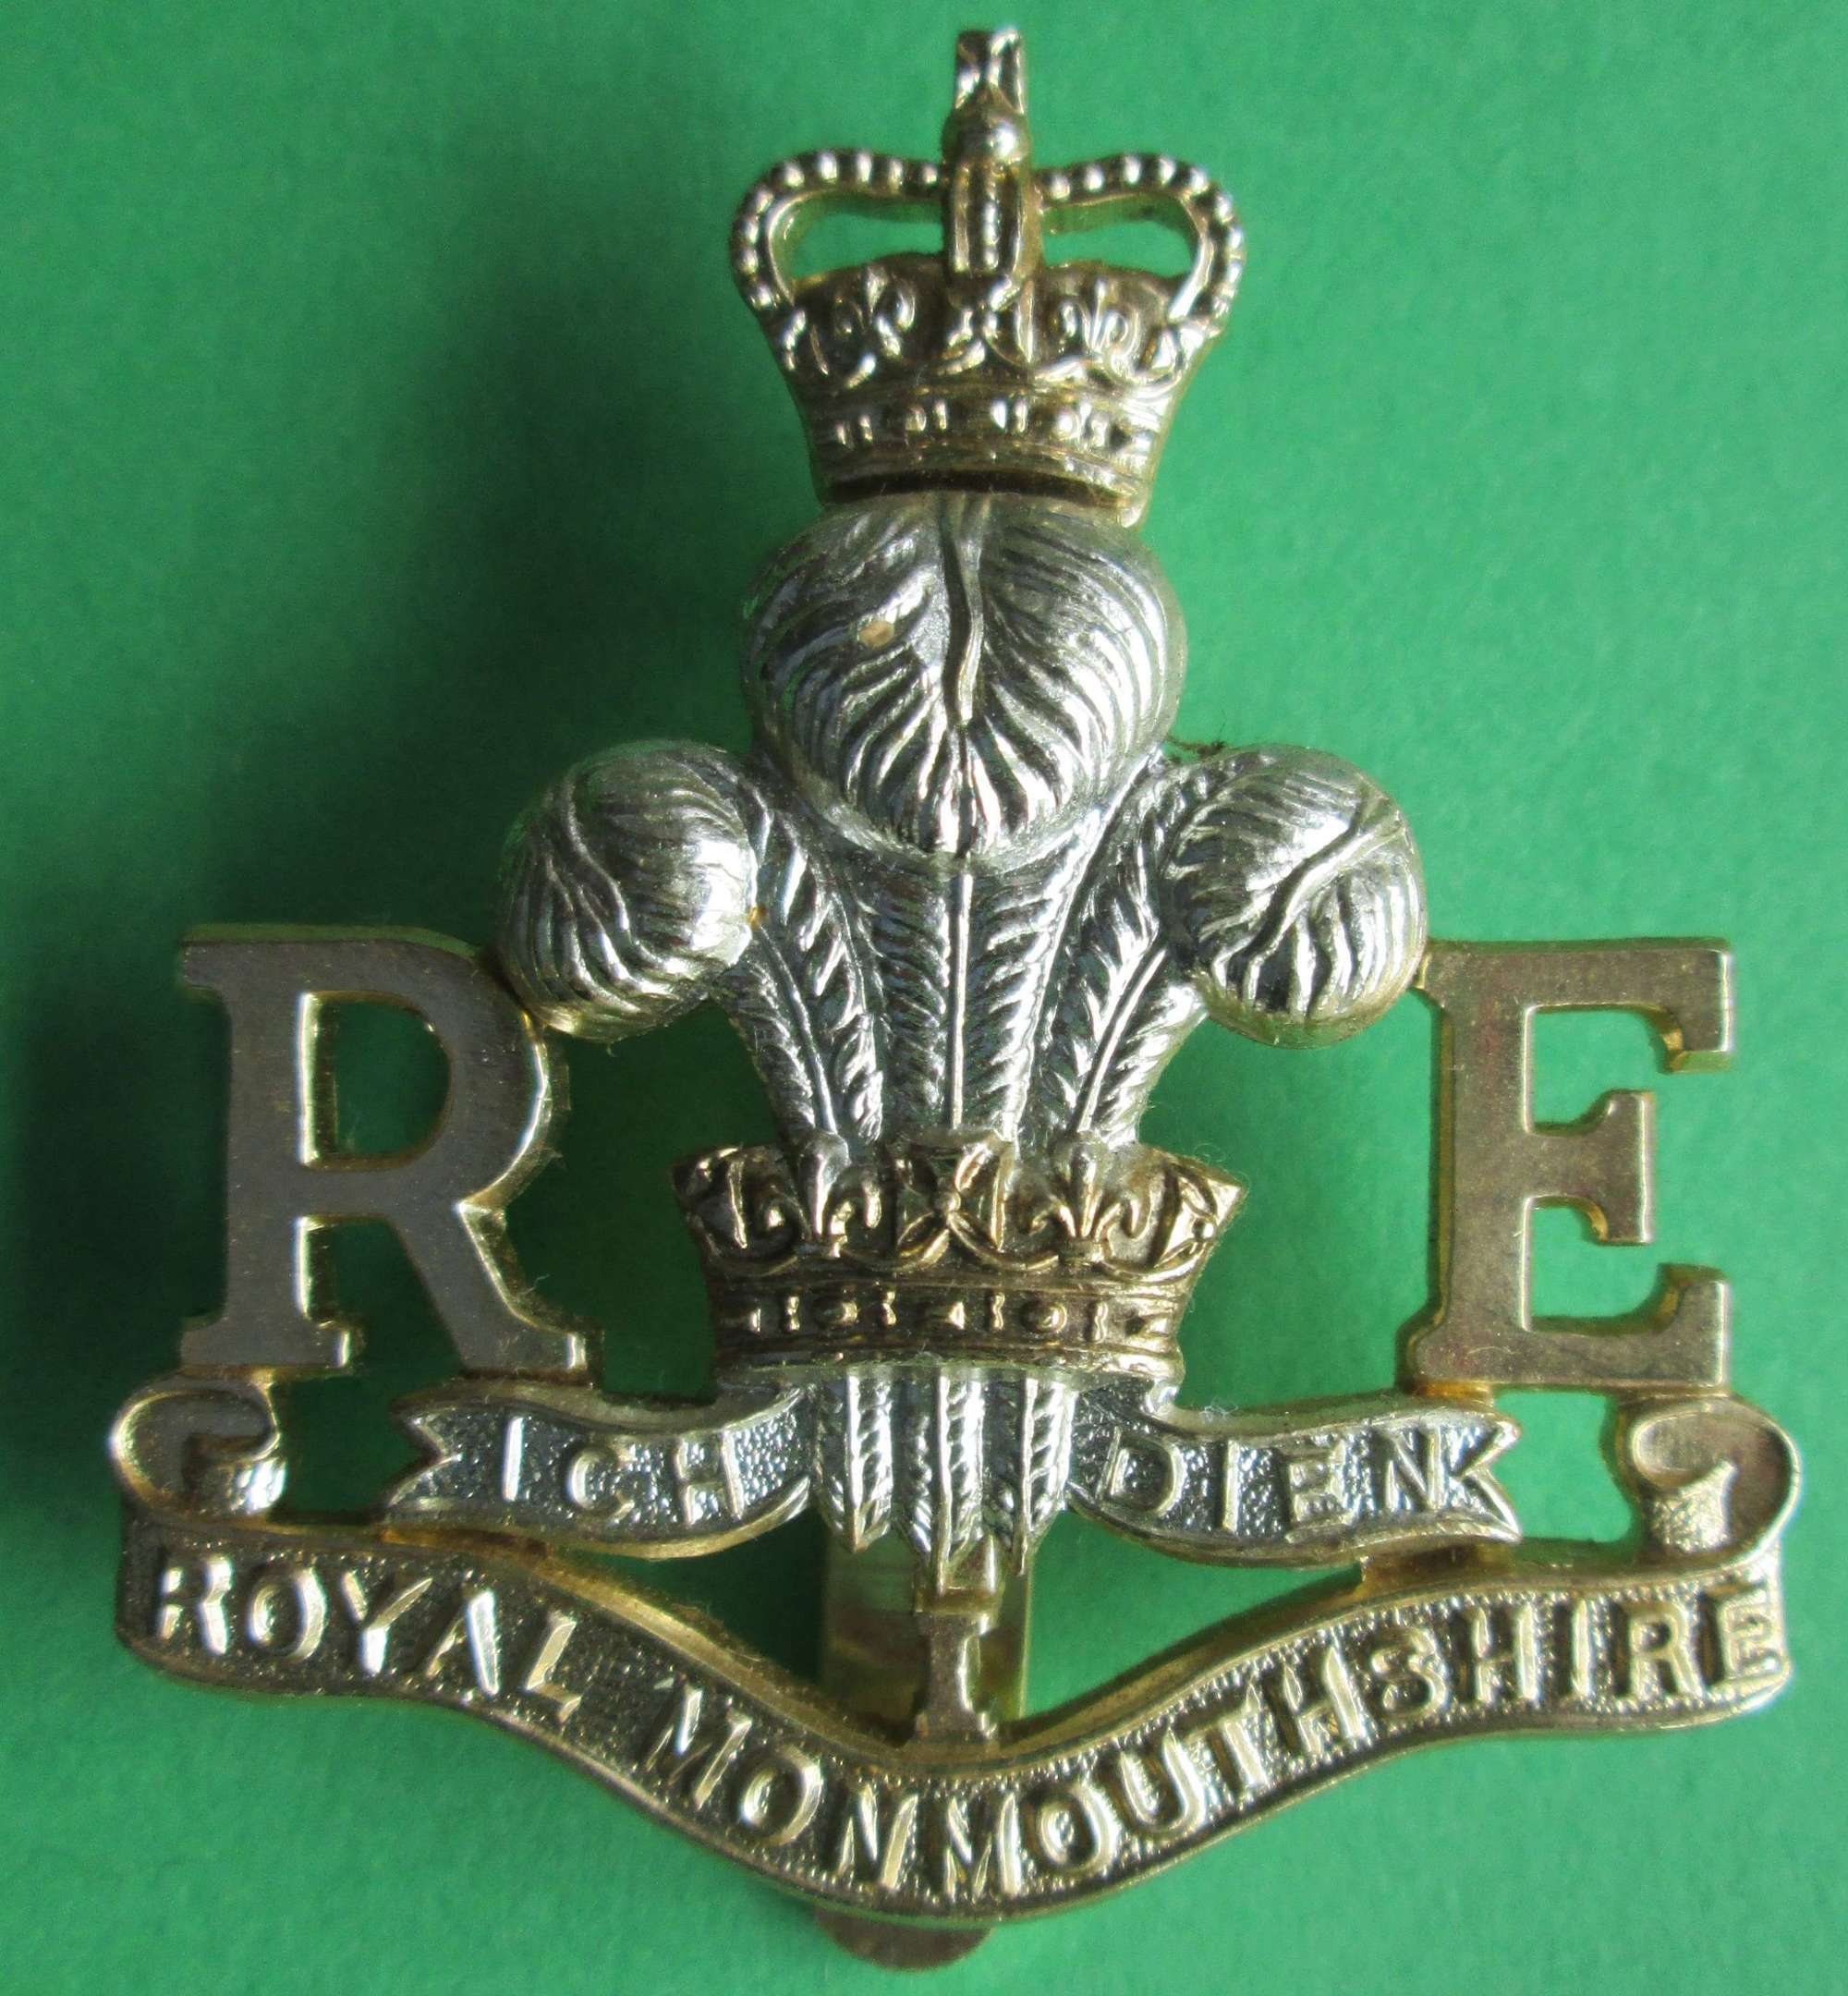 ROYAL MONMOUTHSHIRE ANODISED CAP BADGE